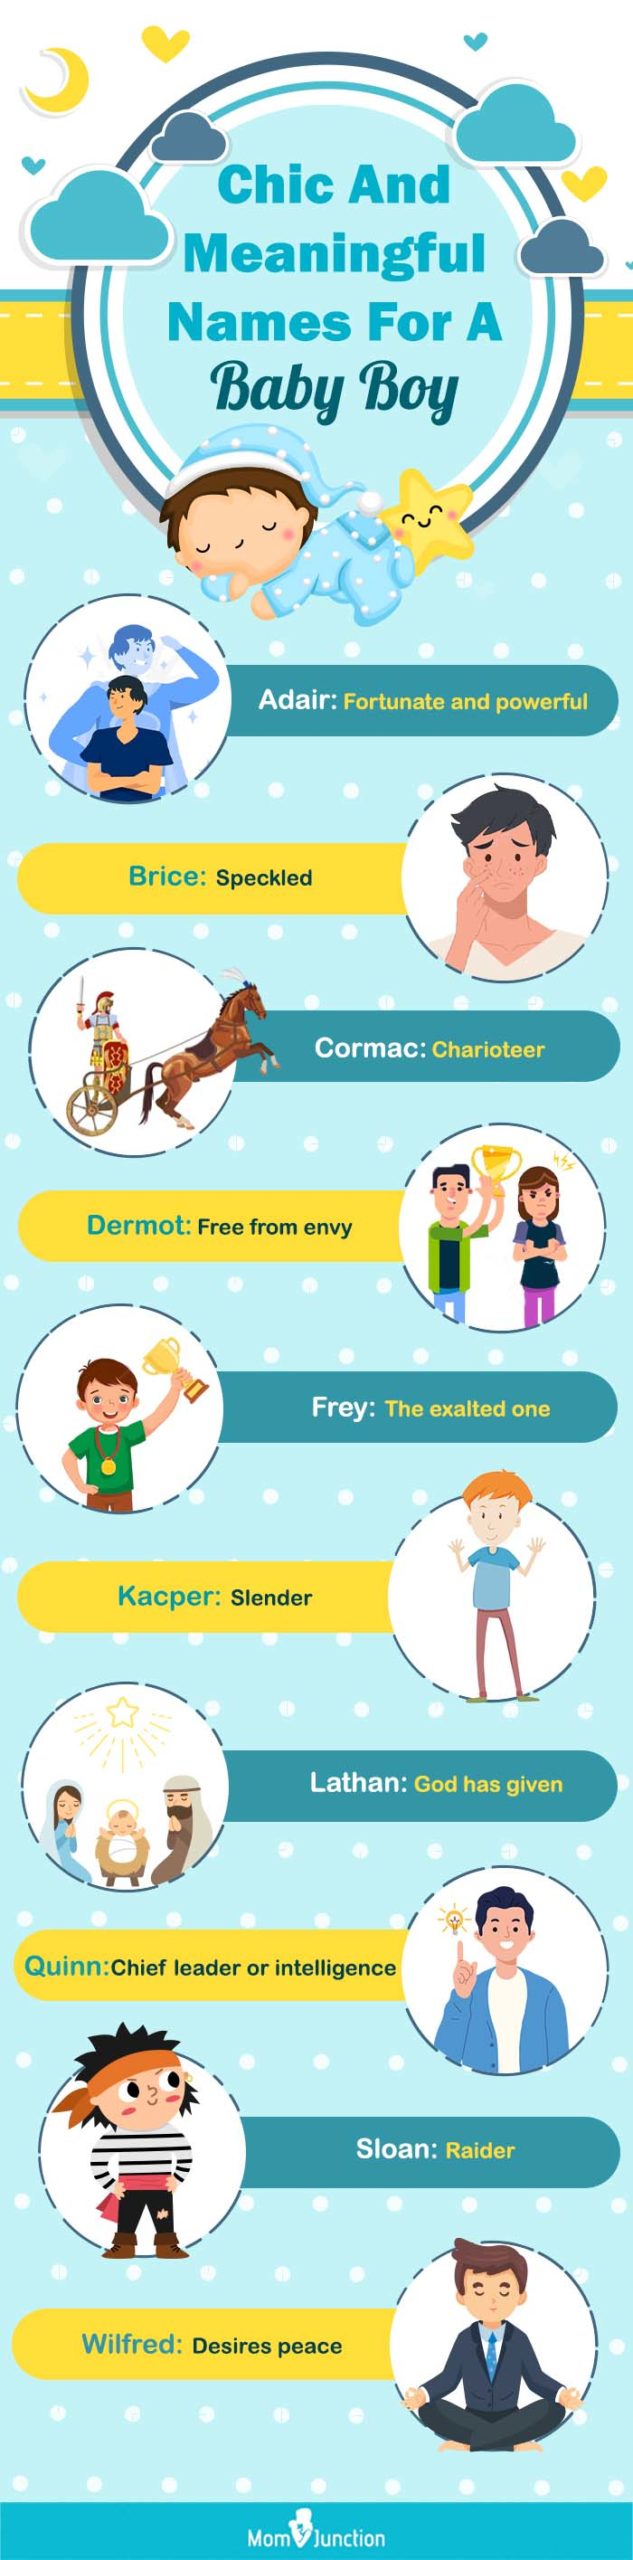 chic and meaningful names for a baby boy (infographic)